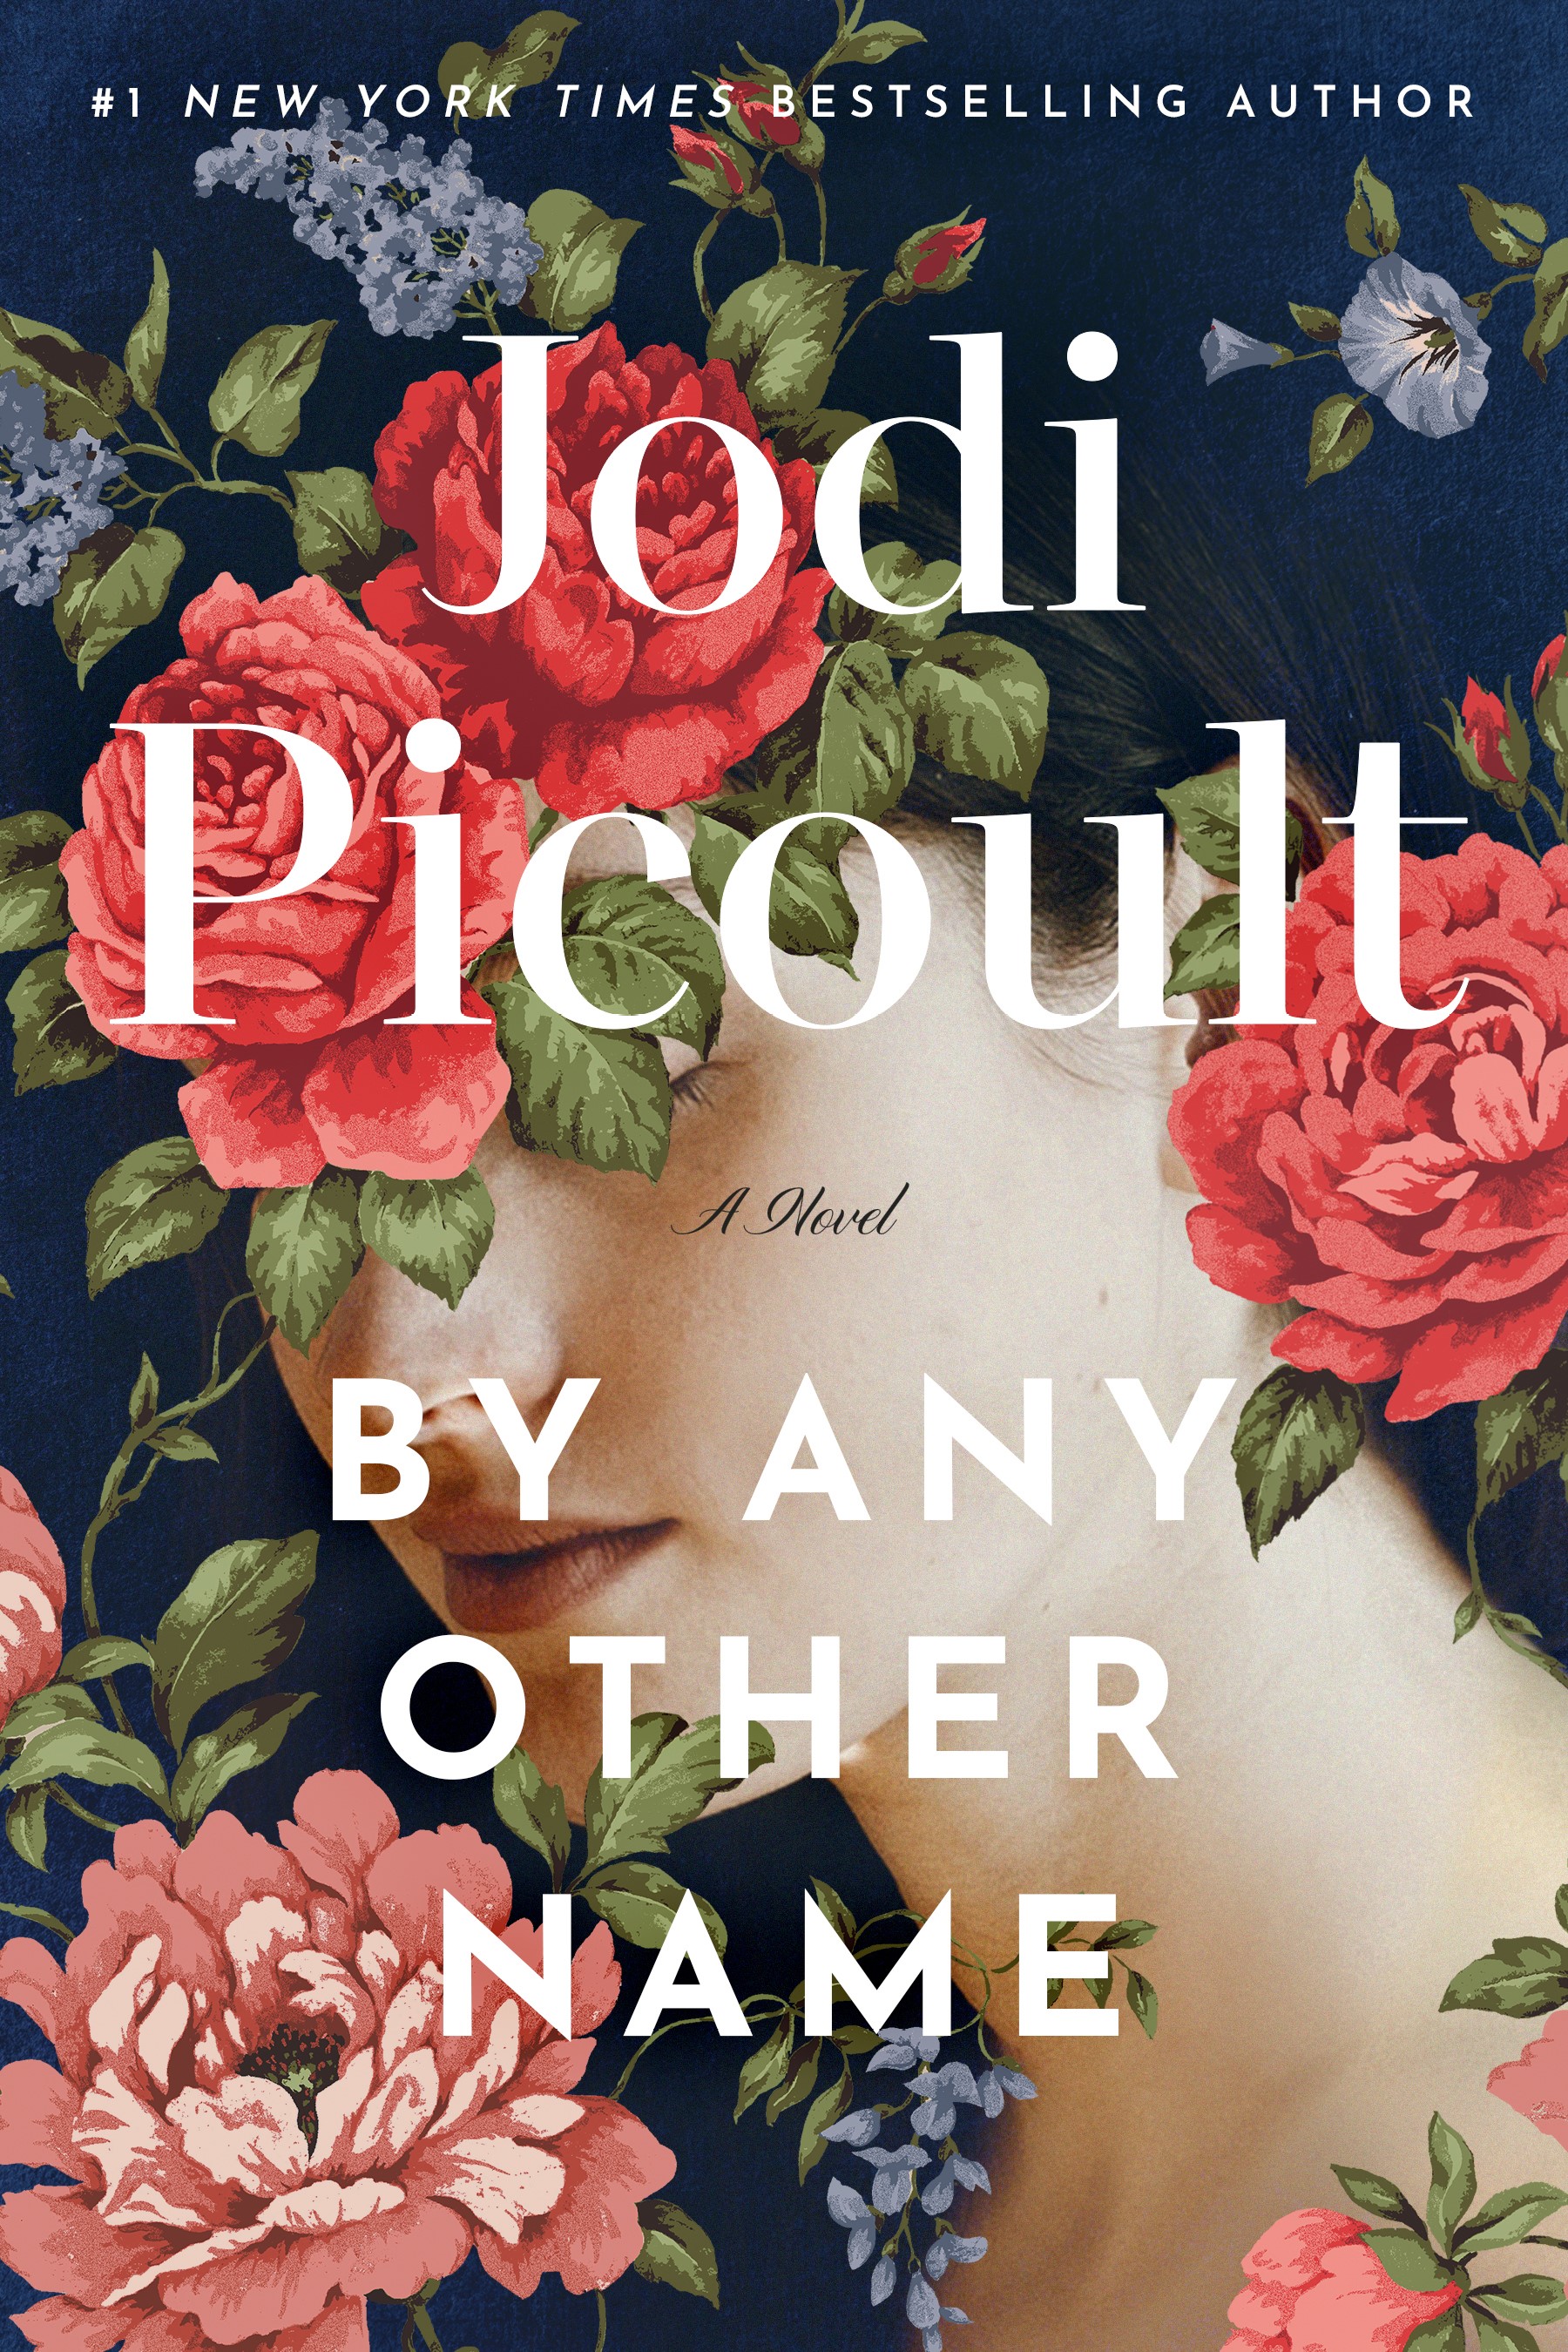 Author Event with Jodi Picoult/By Any Other Name